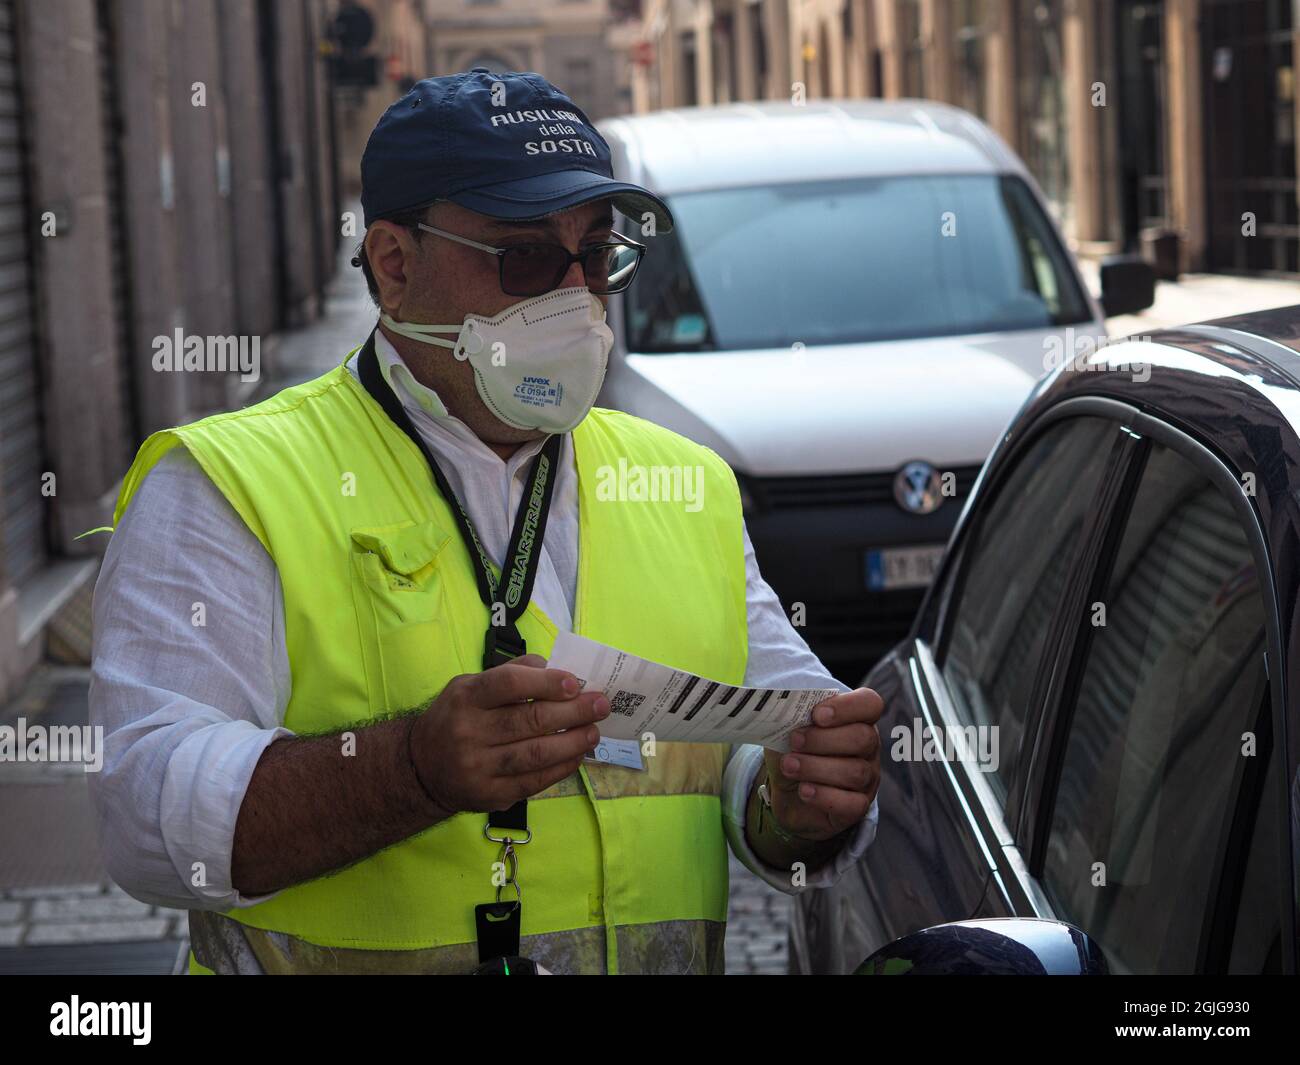 LOMBARDY, ITALY - Aug 19, 2021: A parking warden attendant from a private outsourced company issuing parking violations online printing and leaving th Stock Photo